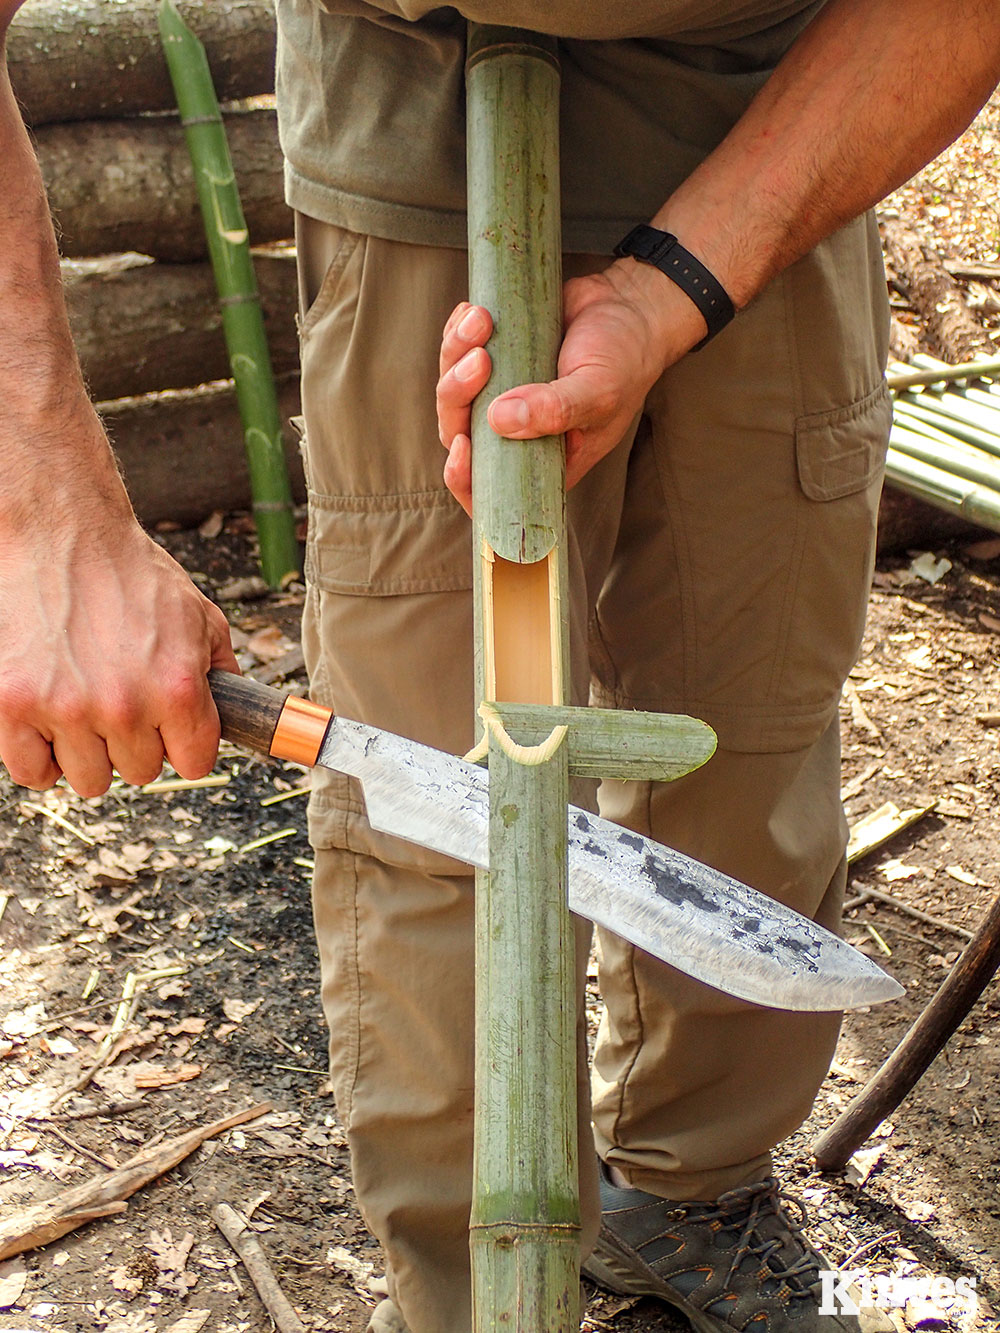 The author made a rice maker with the Golok 135 on some thin-walled, green bamboo. This is a jungle-style rice maker from jungle survival training in the Philippines and requires a sharp blade.